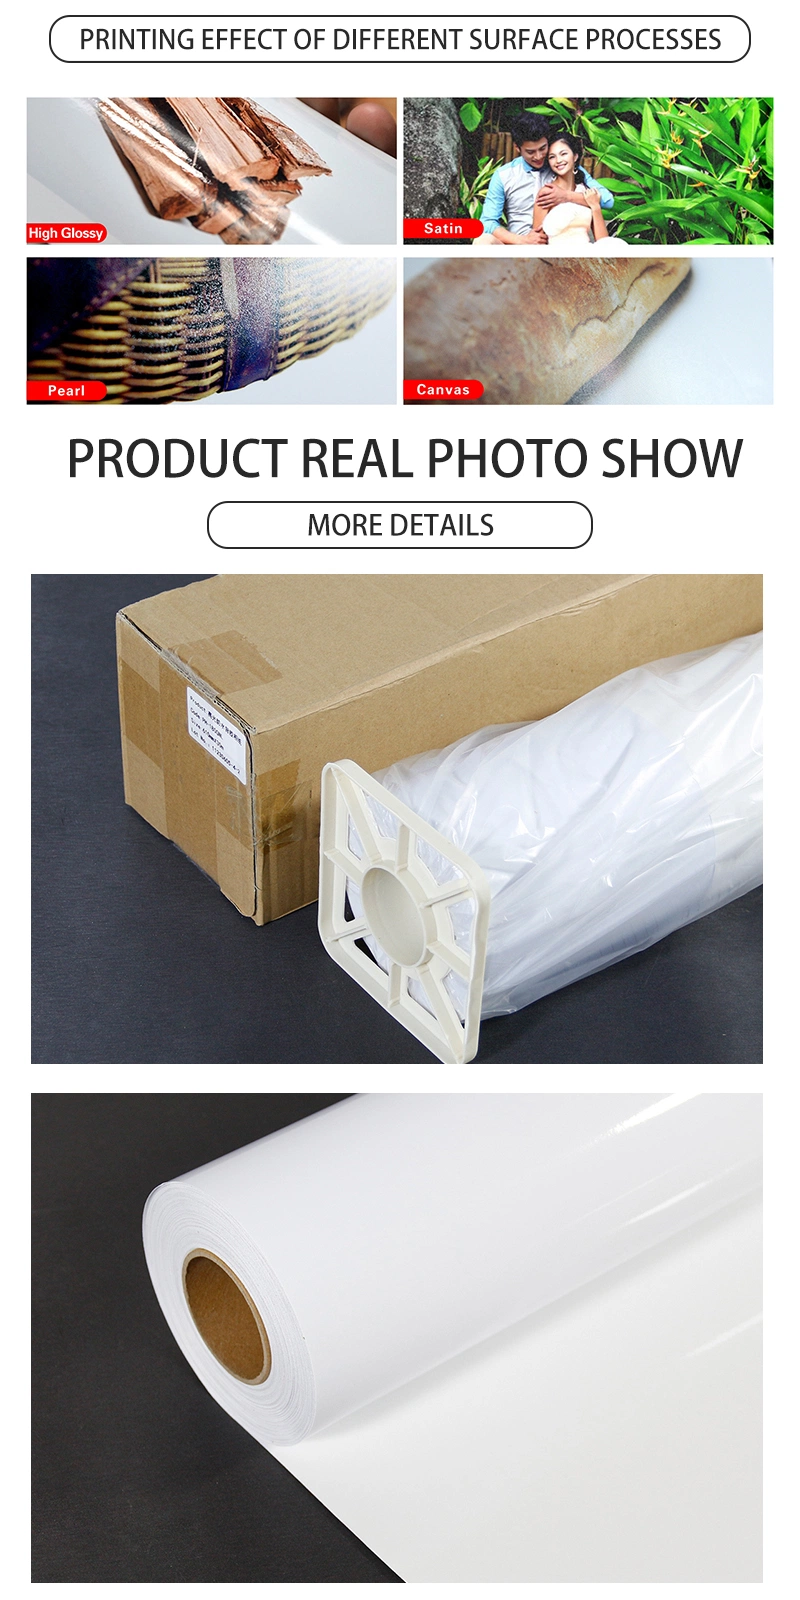 Glossy Surface Self-Adhesive Water-Based RC Photo Paper for Digital Printing